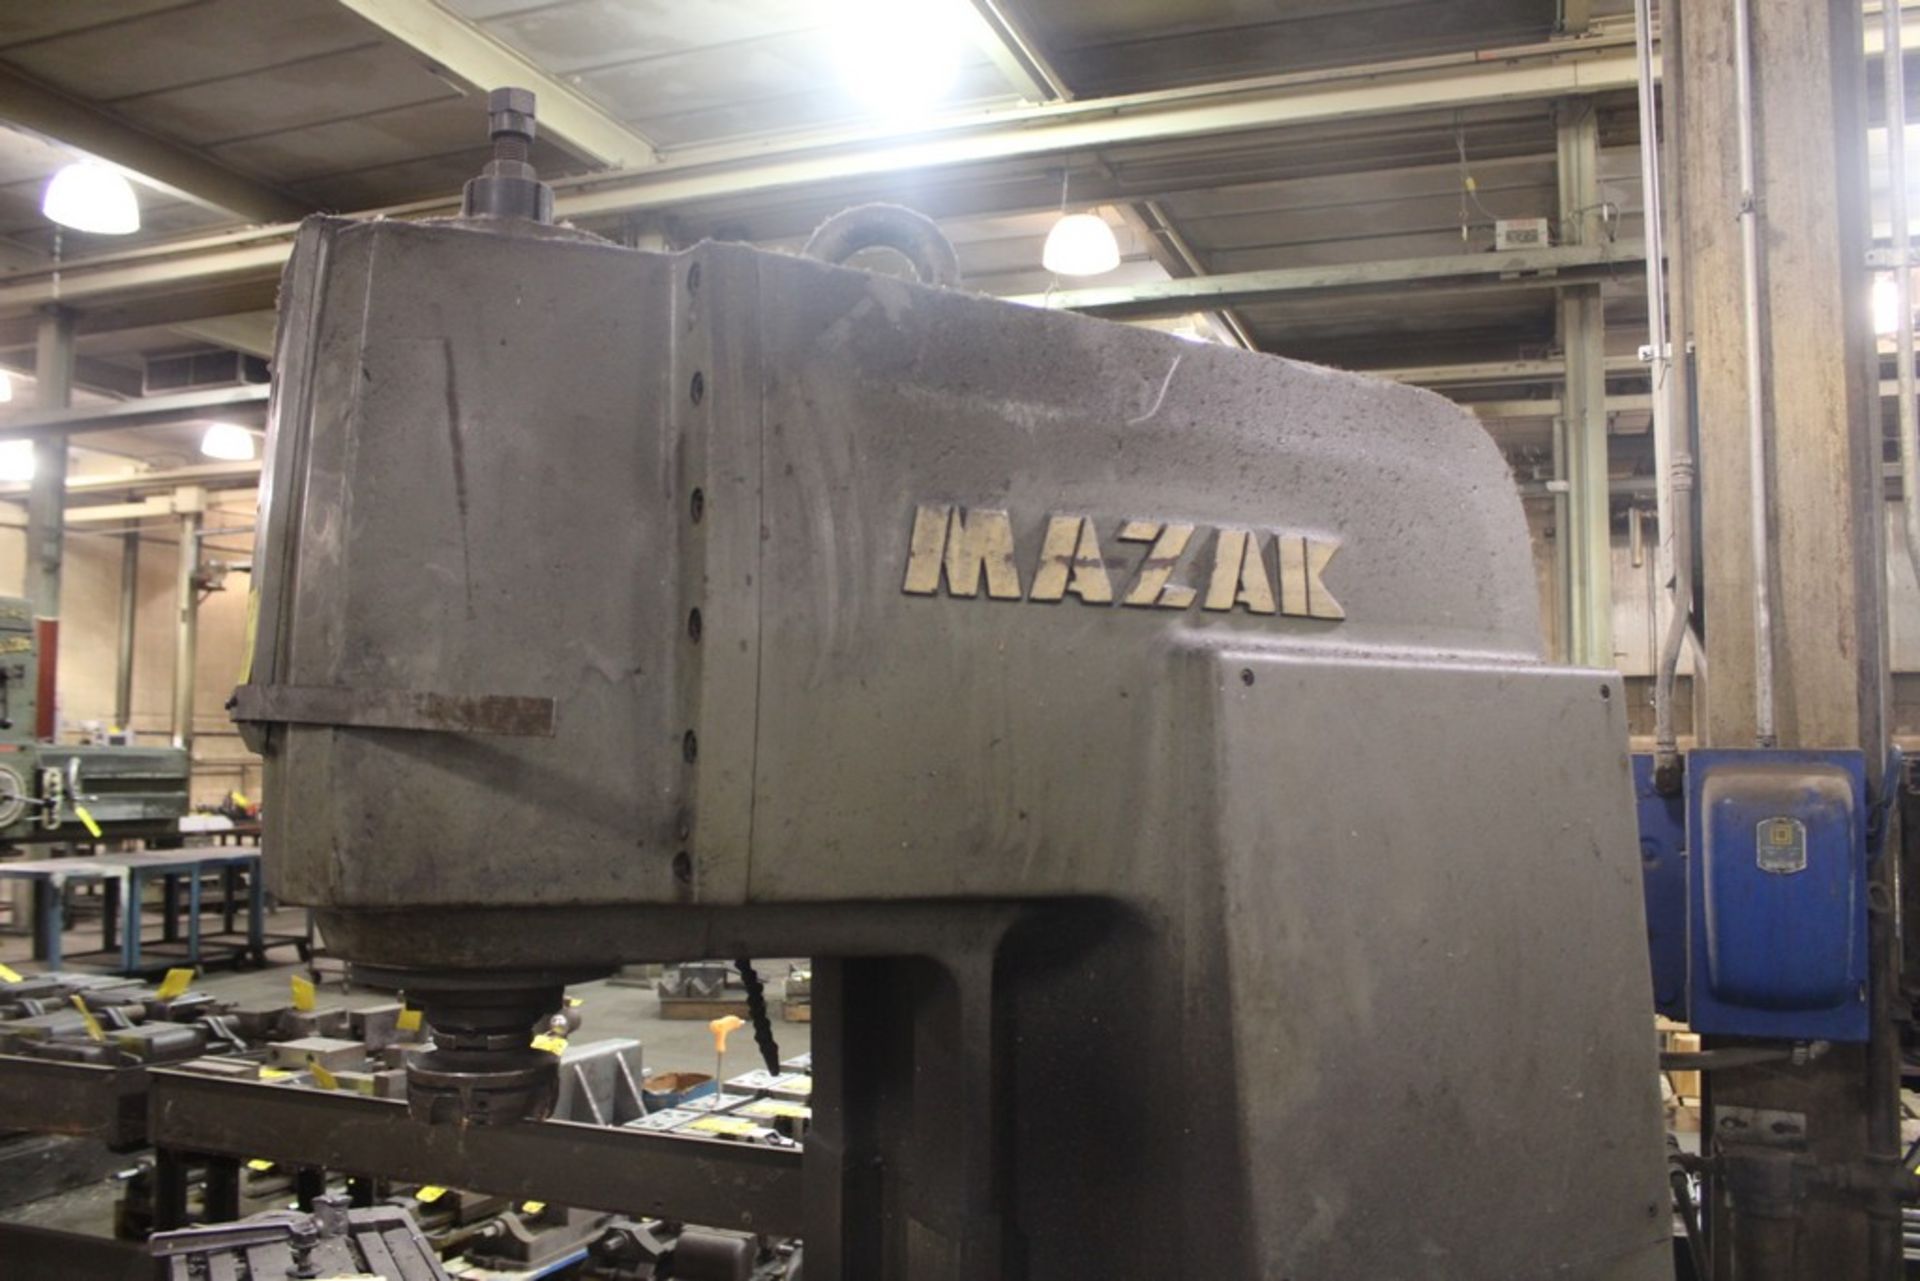 MAZAK MODEL V-1000 VERTICAL MILL, S/N 11695, 12”X63” TABLE, 1500 RPM SPINDLE - Image 5 of 7